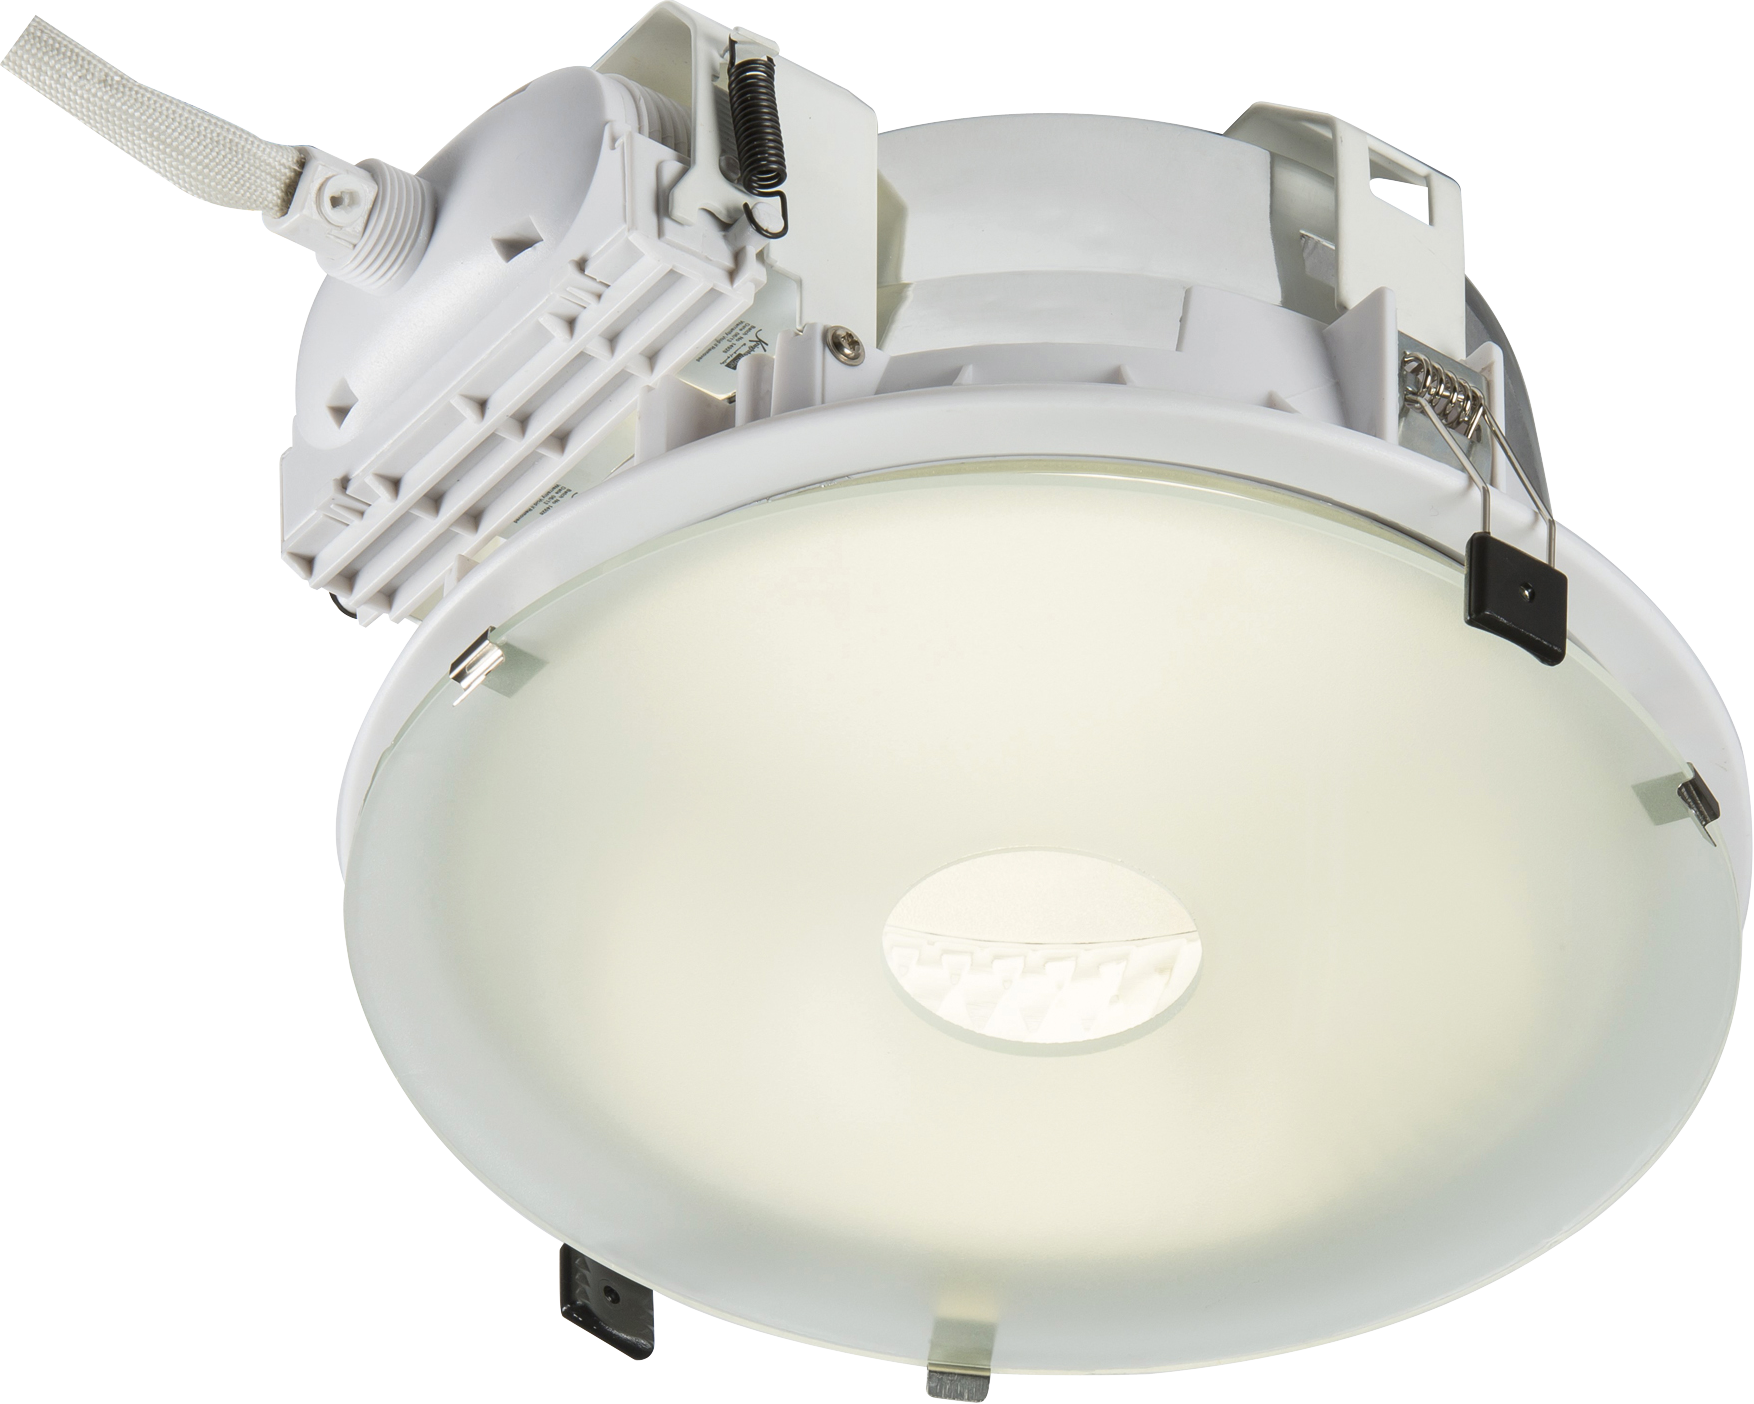 PLDL Frosted Drop Glass Accessory 230mm PL Downlight - PLDDGM 